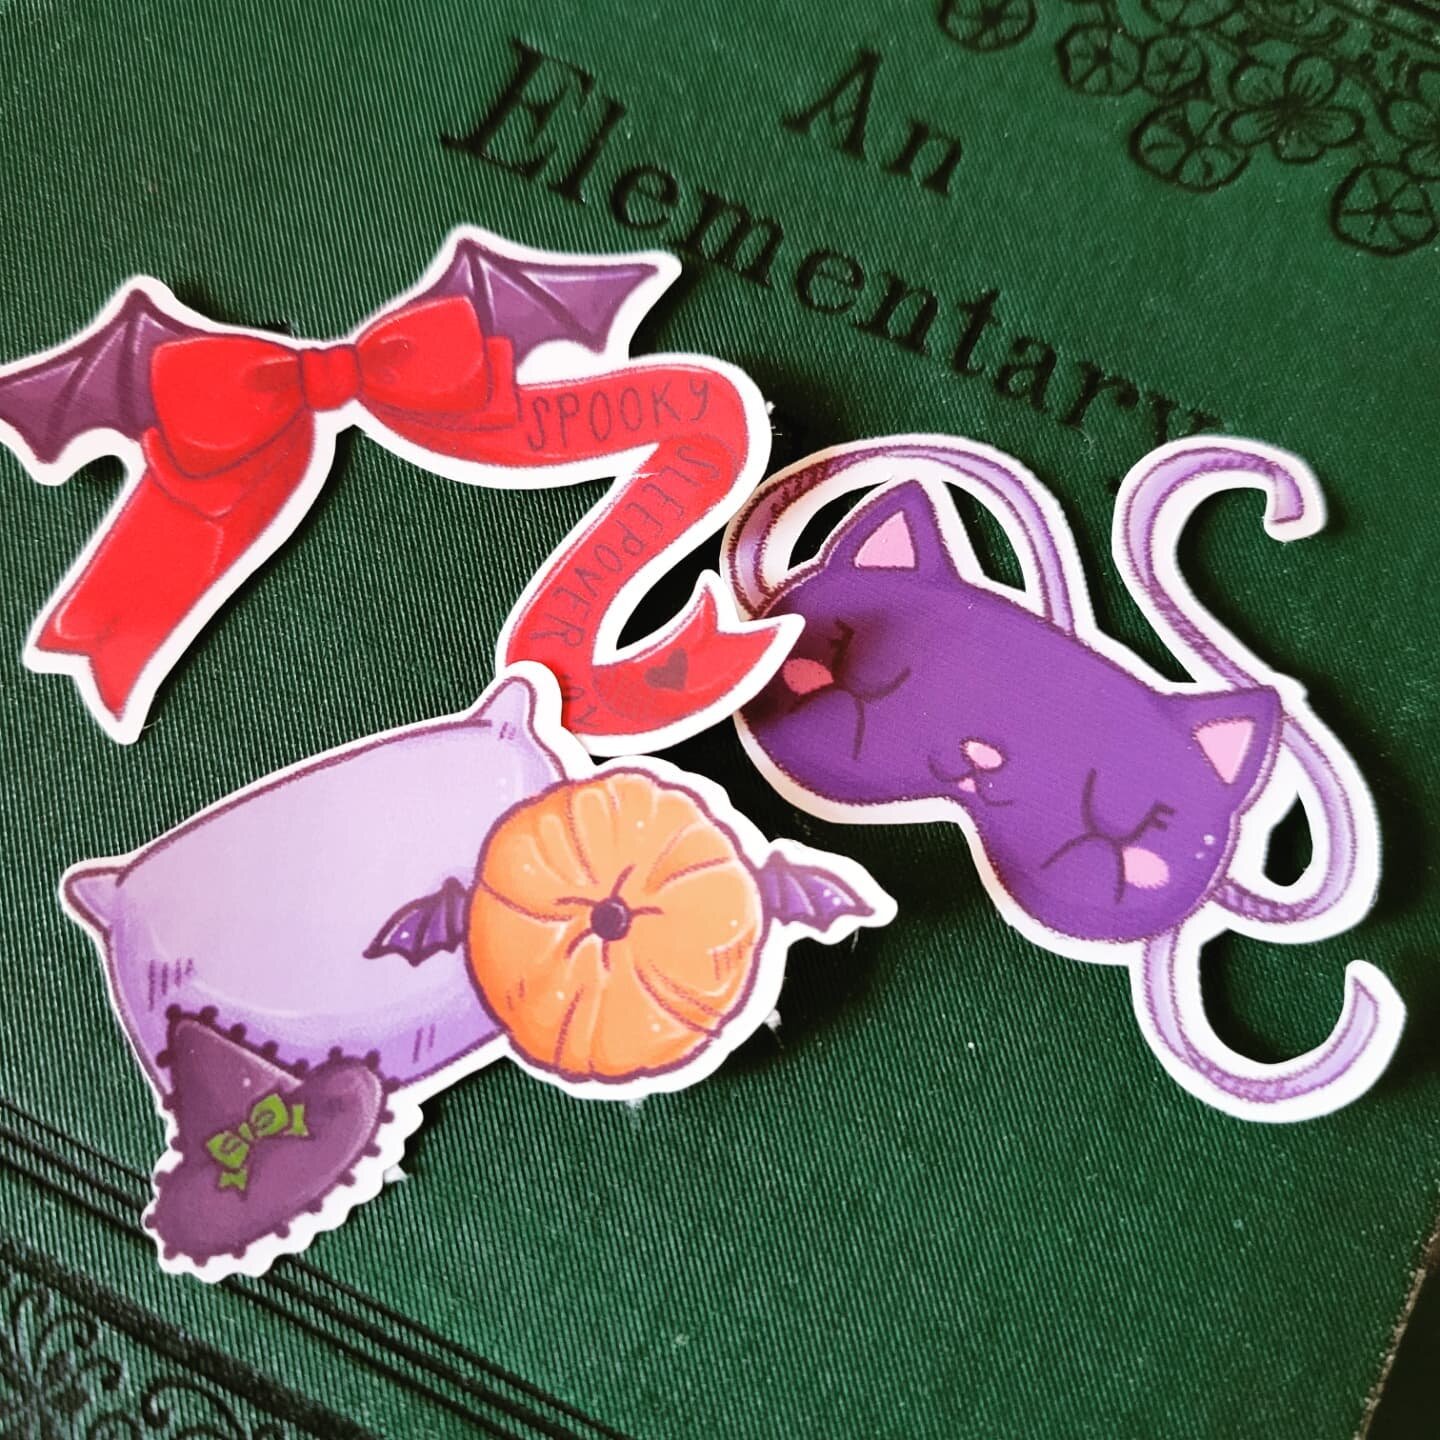 Here's a little peek at the super special event stickers you could win tonight on #twitch during our spooky sleepover!! Don't miss it, it's gonna be a blast! 4pm PT / twitch.tv/tournewsoul
.
.
.
#cricutmade #cricutcrafts #twitchmakersandcrafting #twi